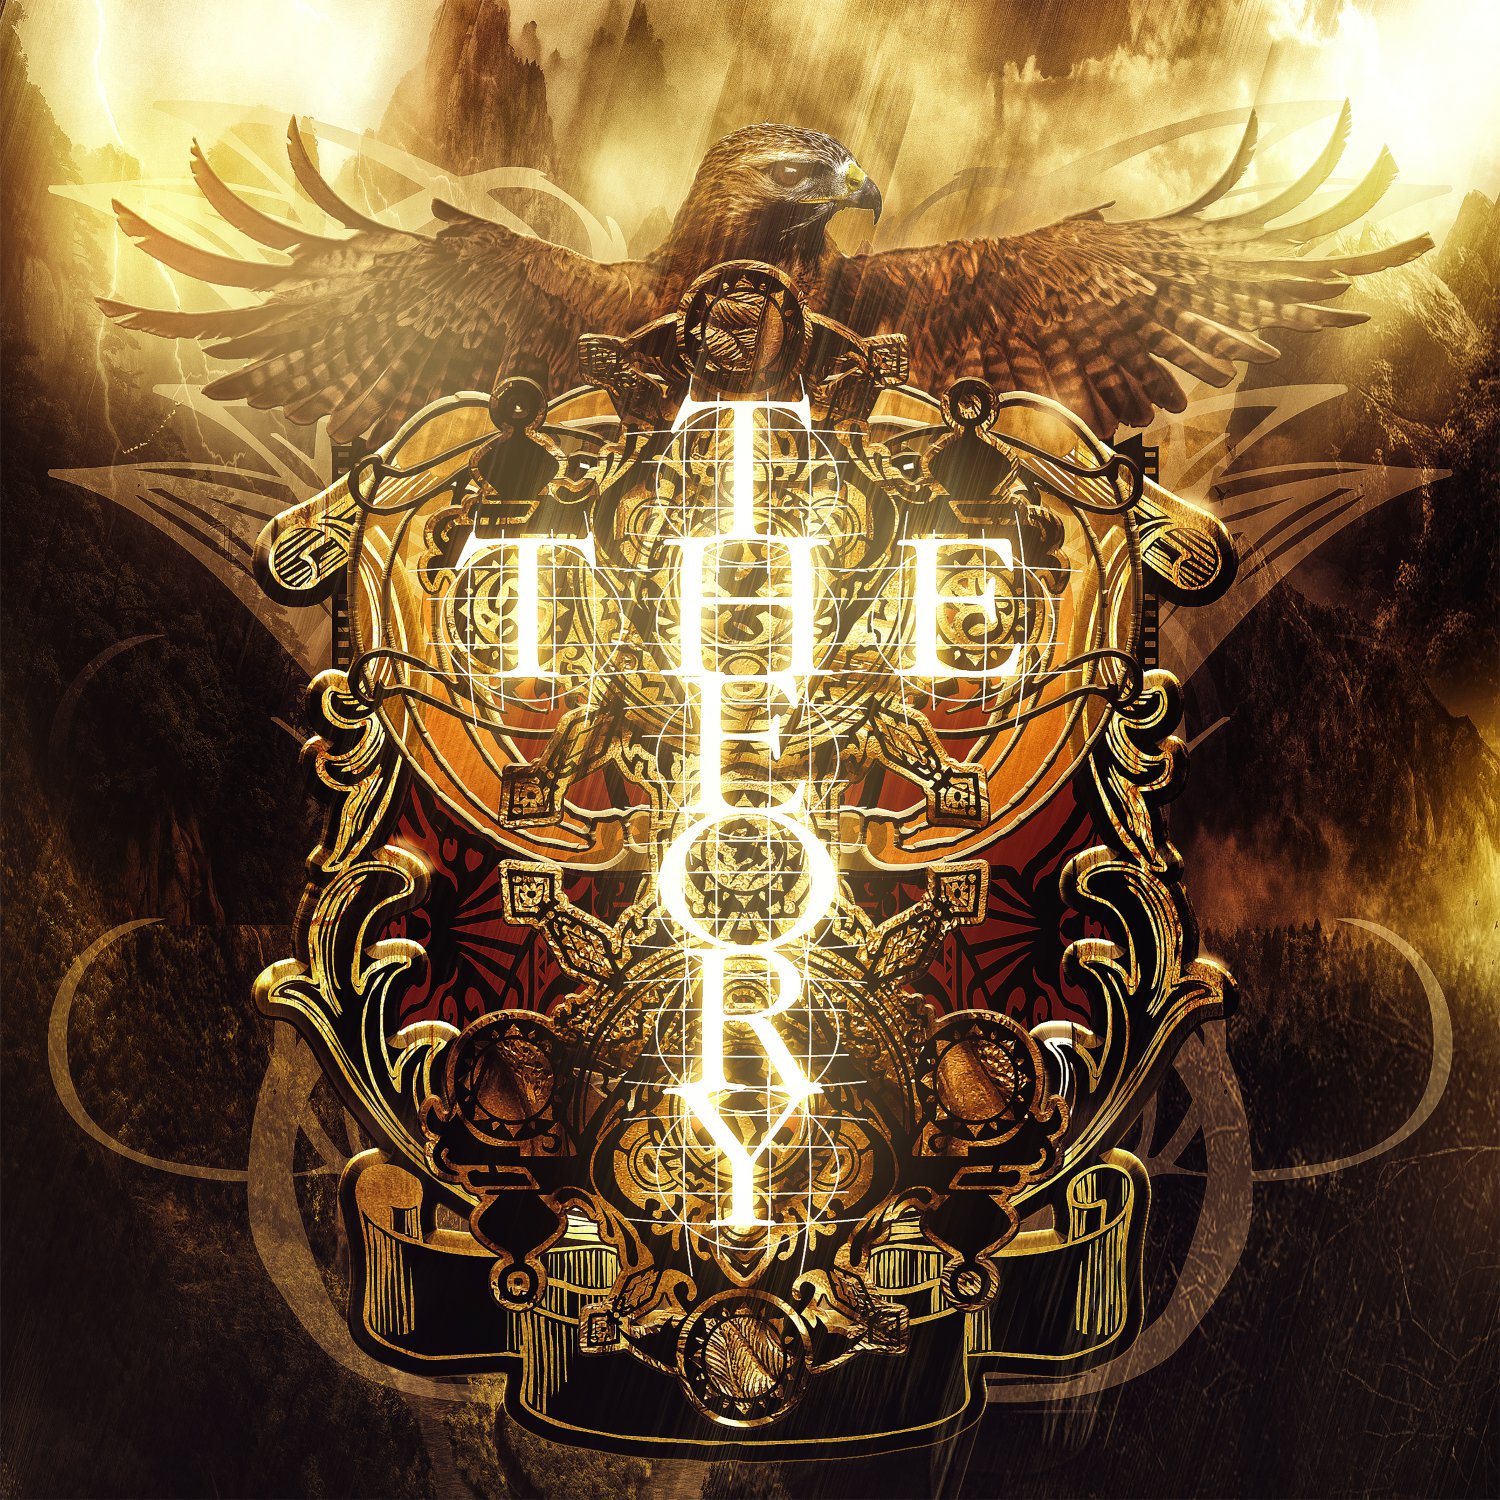 The Theory CD by The Theory